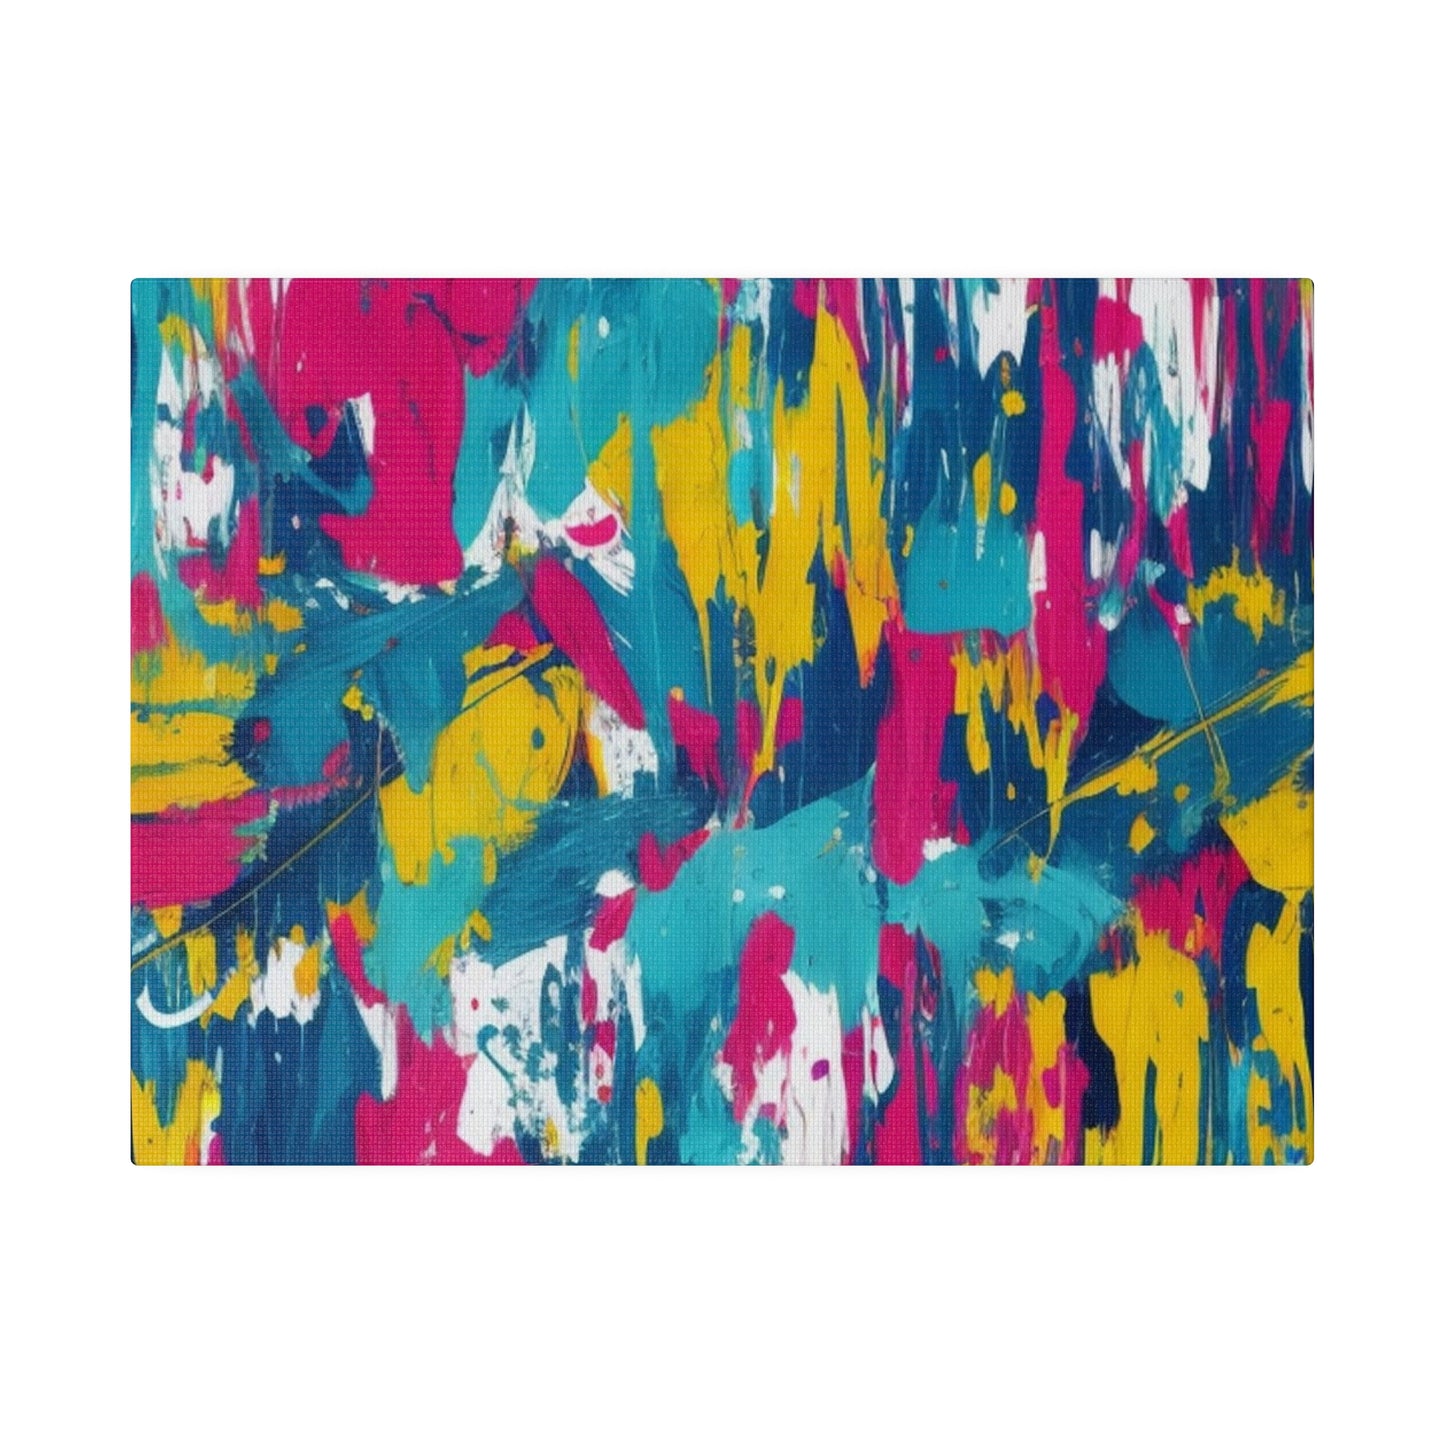 Messy Paint Art - Matte Canvas, Stretched, 0.75"